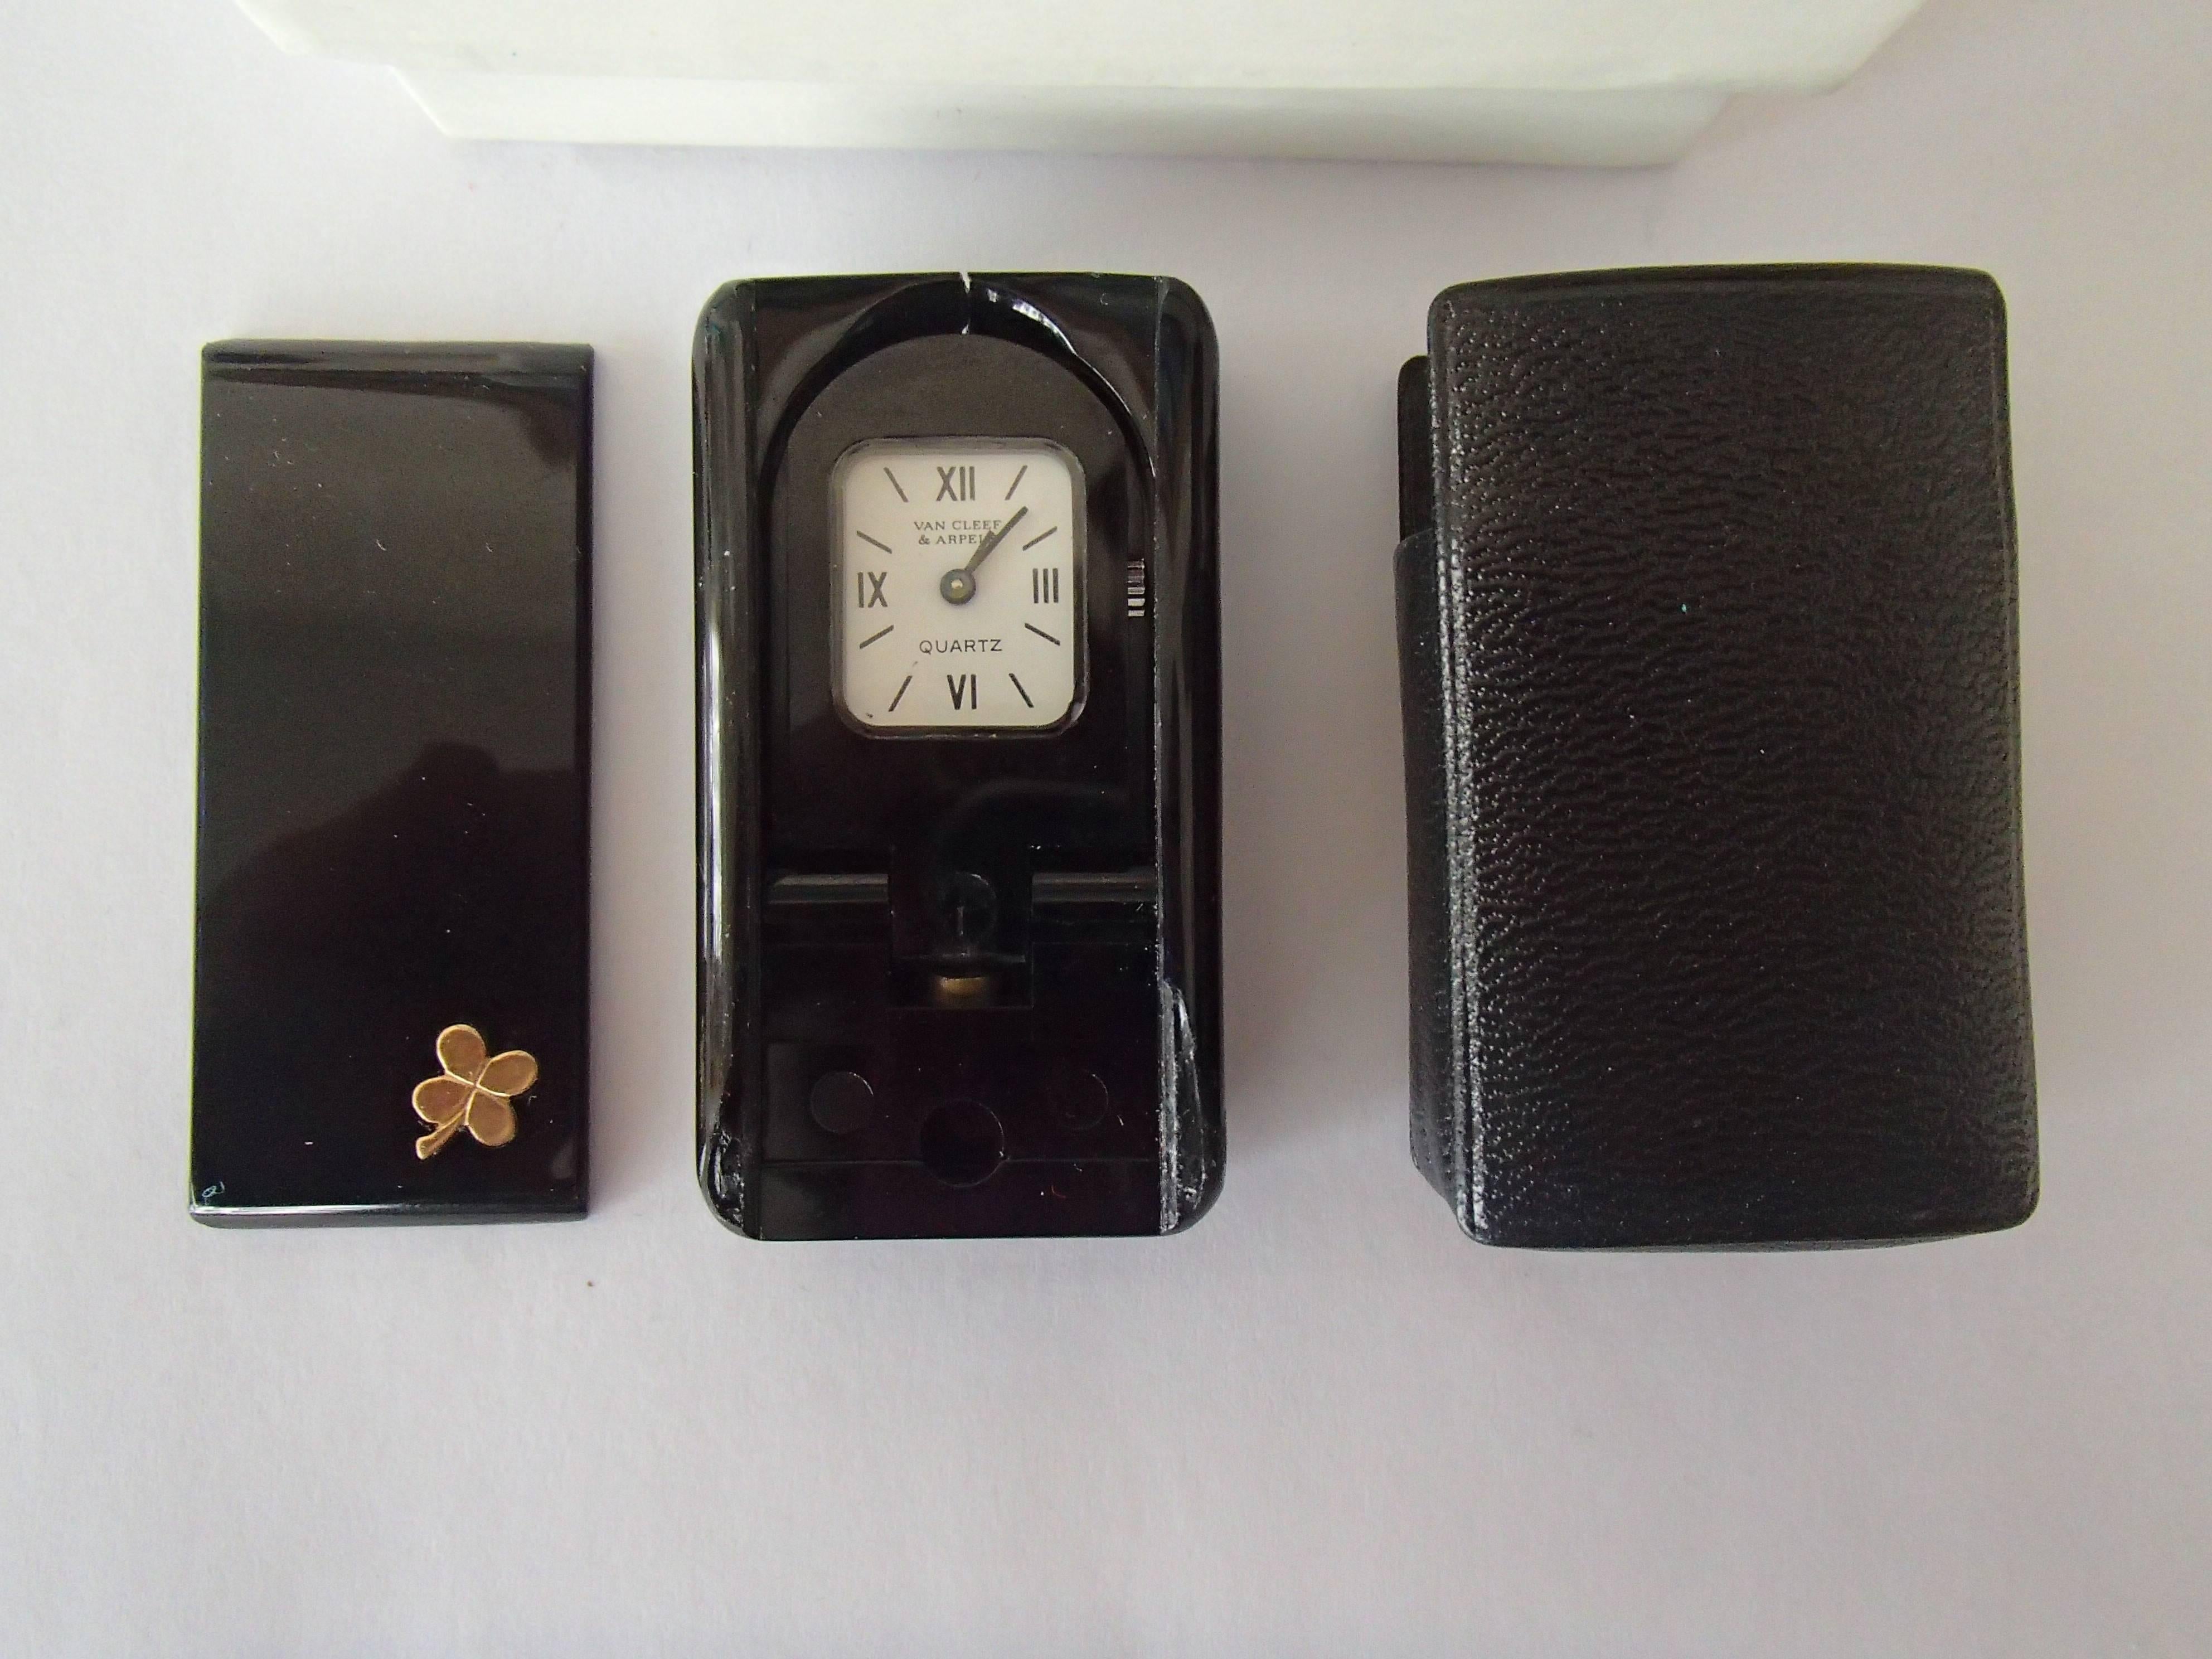 American Modern Travelling Clock by Van Cleef & Arpels Foldable in Case and Original Box